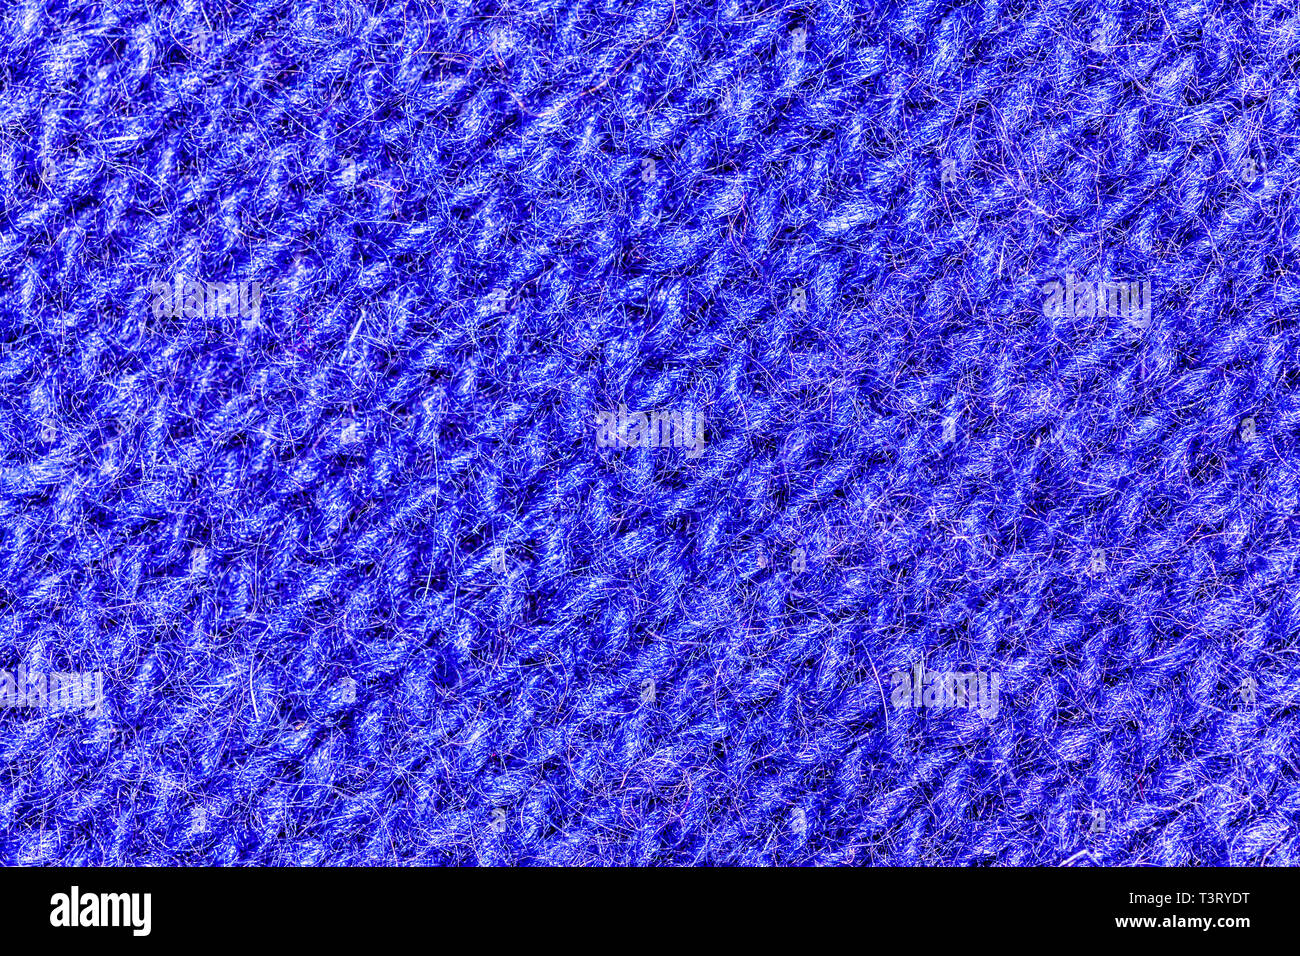 Macro view on the blue wool texture background. Very close macro photo on the pattern. Stock Photo